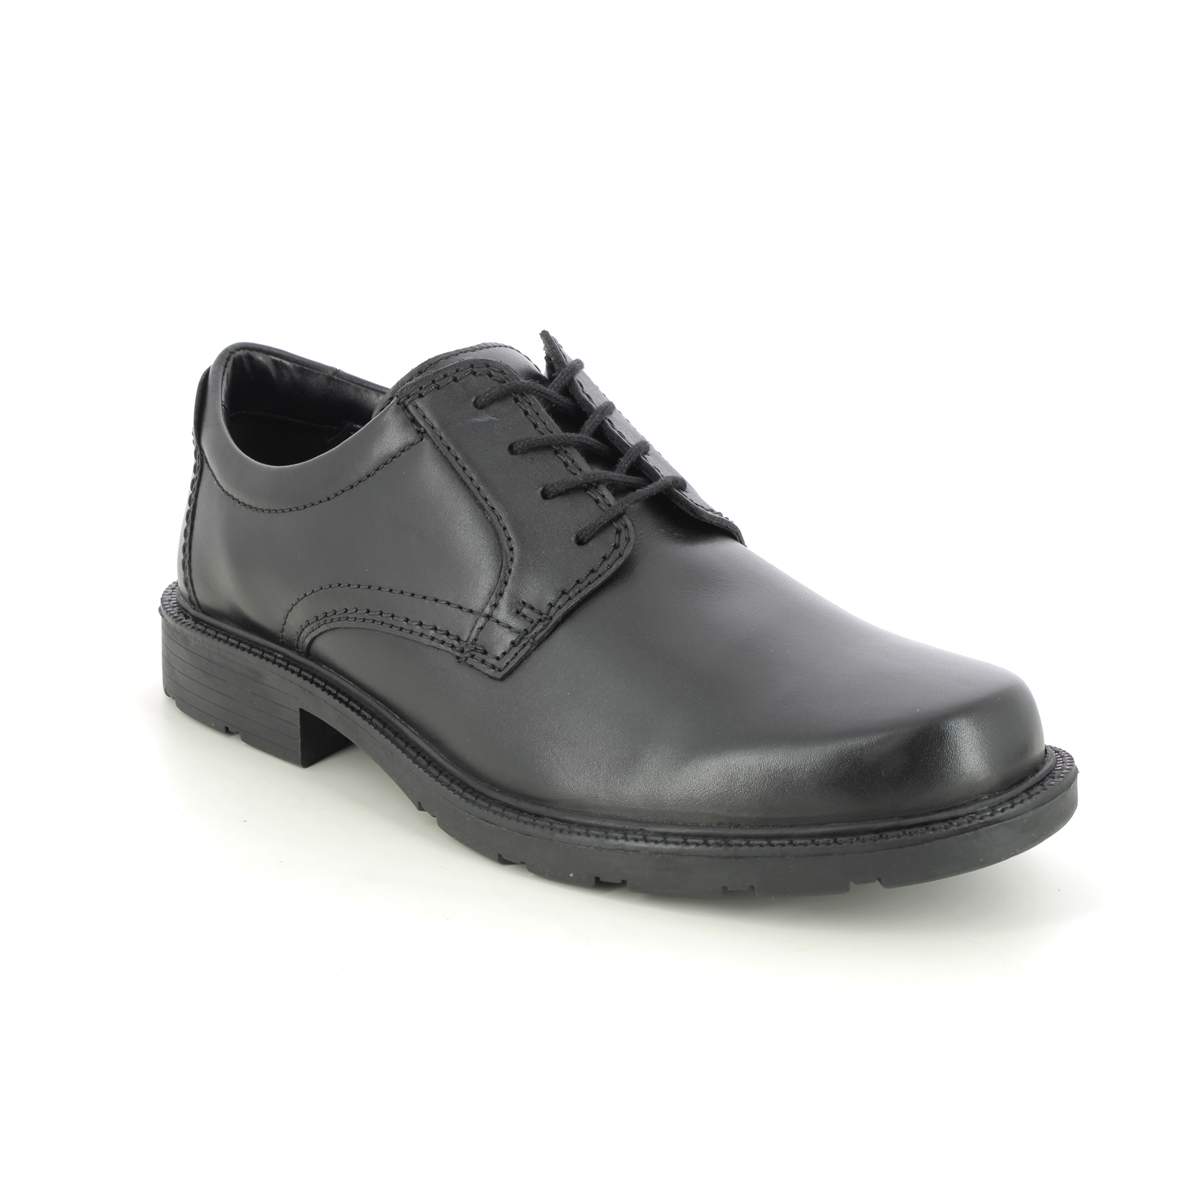 Clarks Kerton Lace Black Leather Mens Formal Shoes 656058H In Size 9 In Plain Black Leather H Width Fitting Extra Wide